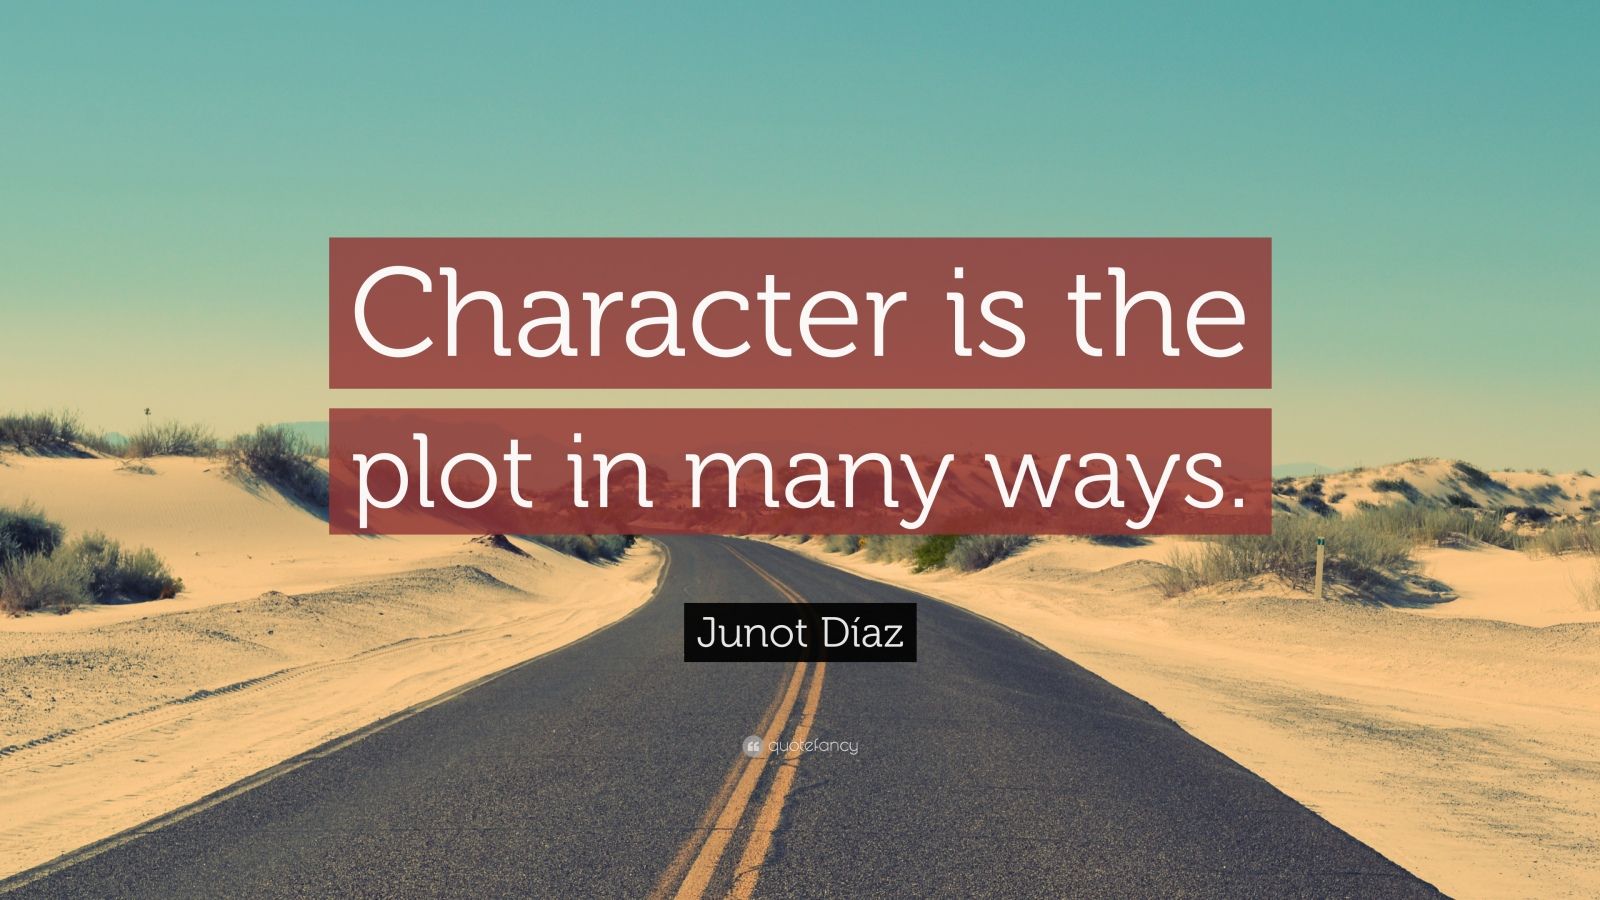 Junot Díaz Quote: “Character is the plot in many ways.” (7 wallpapers) - Quotefancy1600 x 900